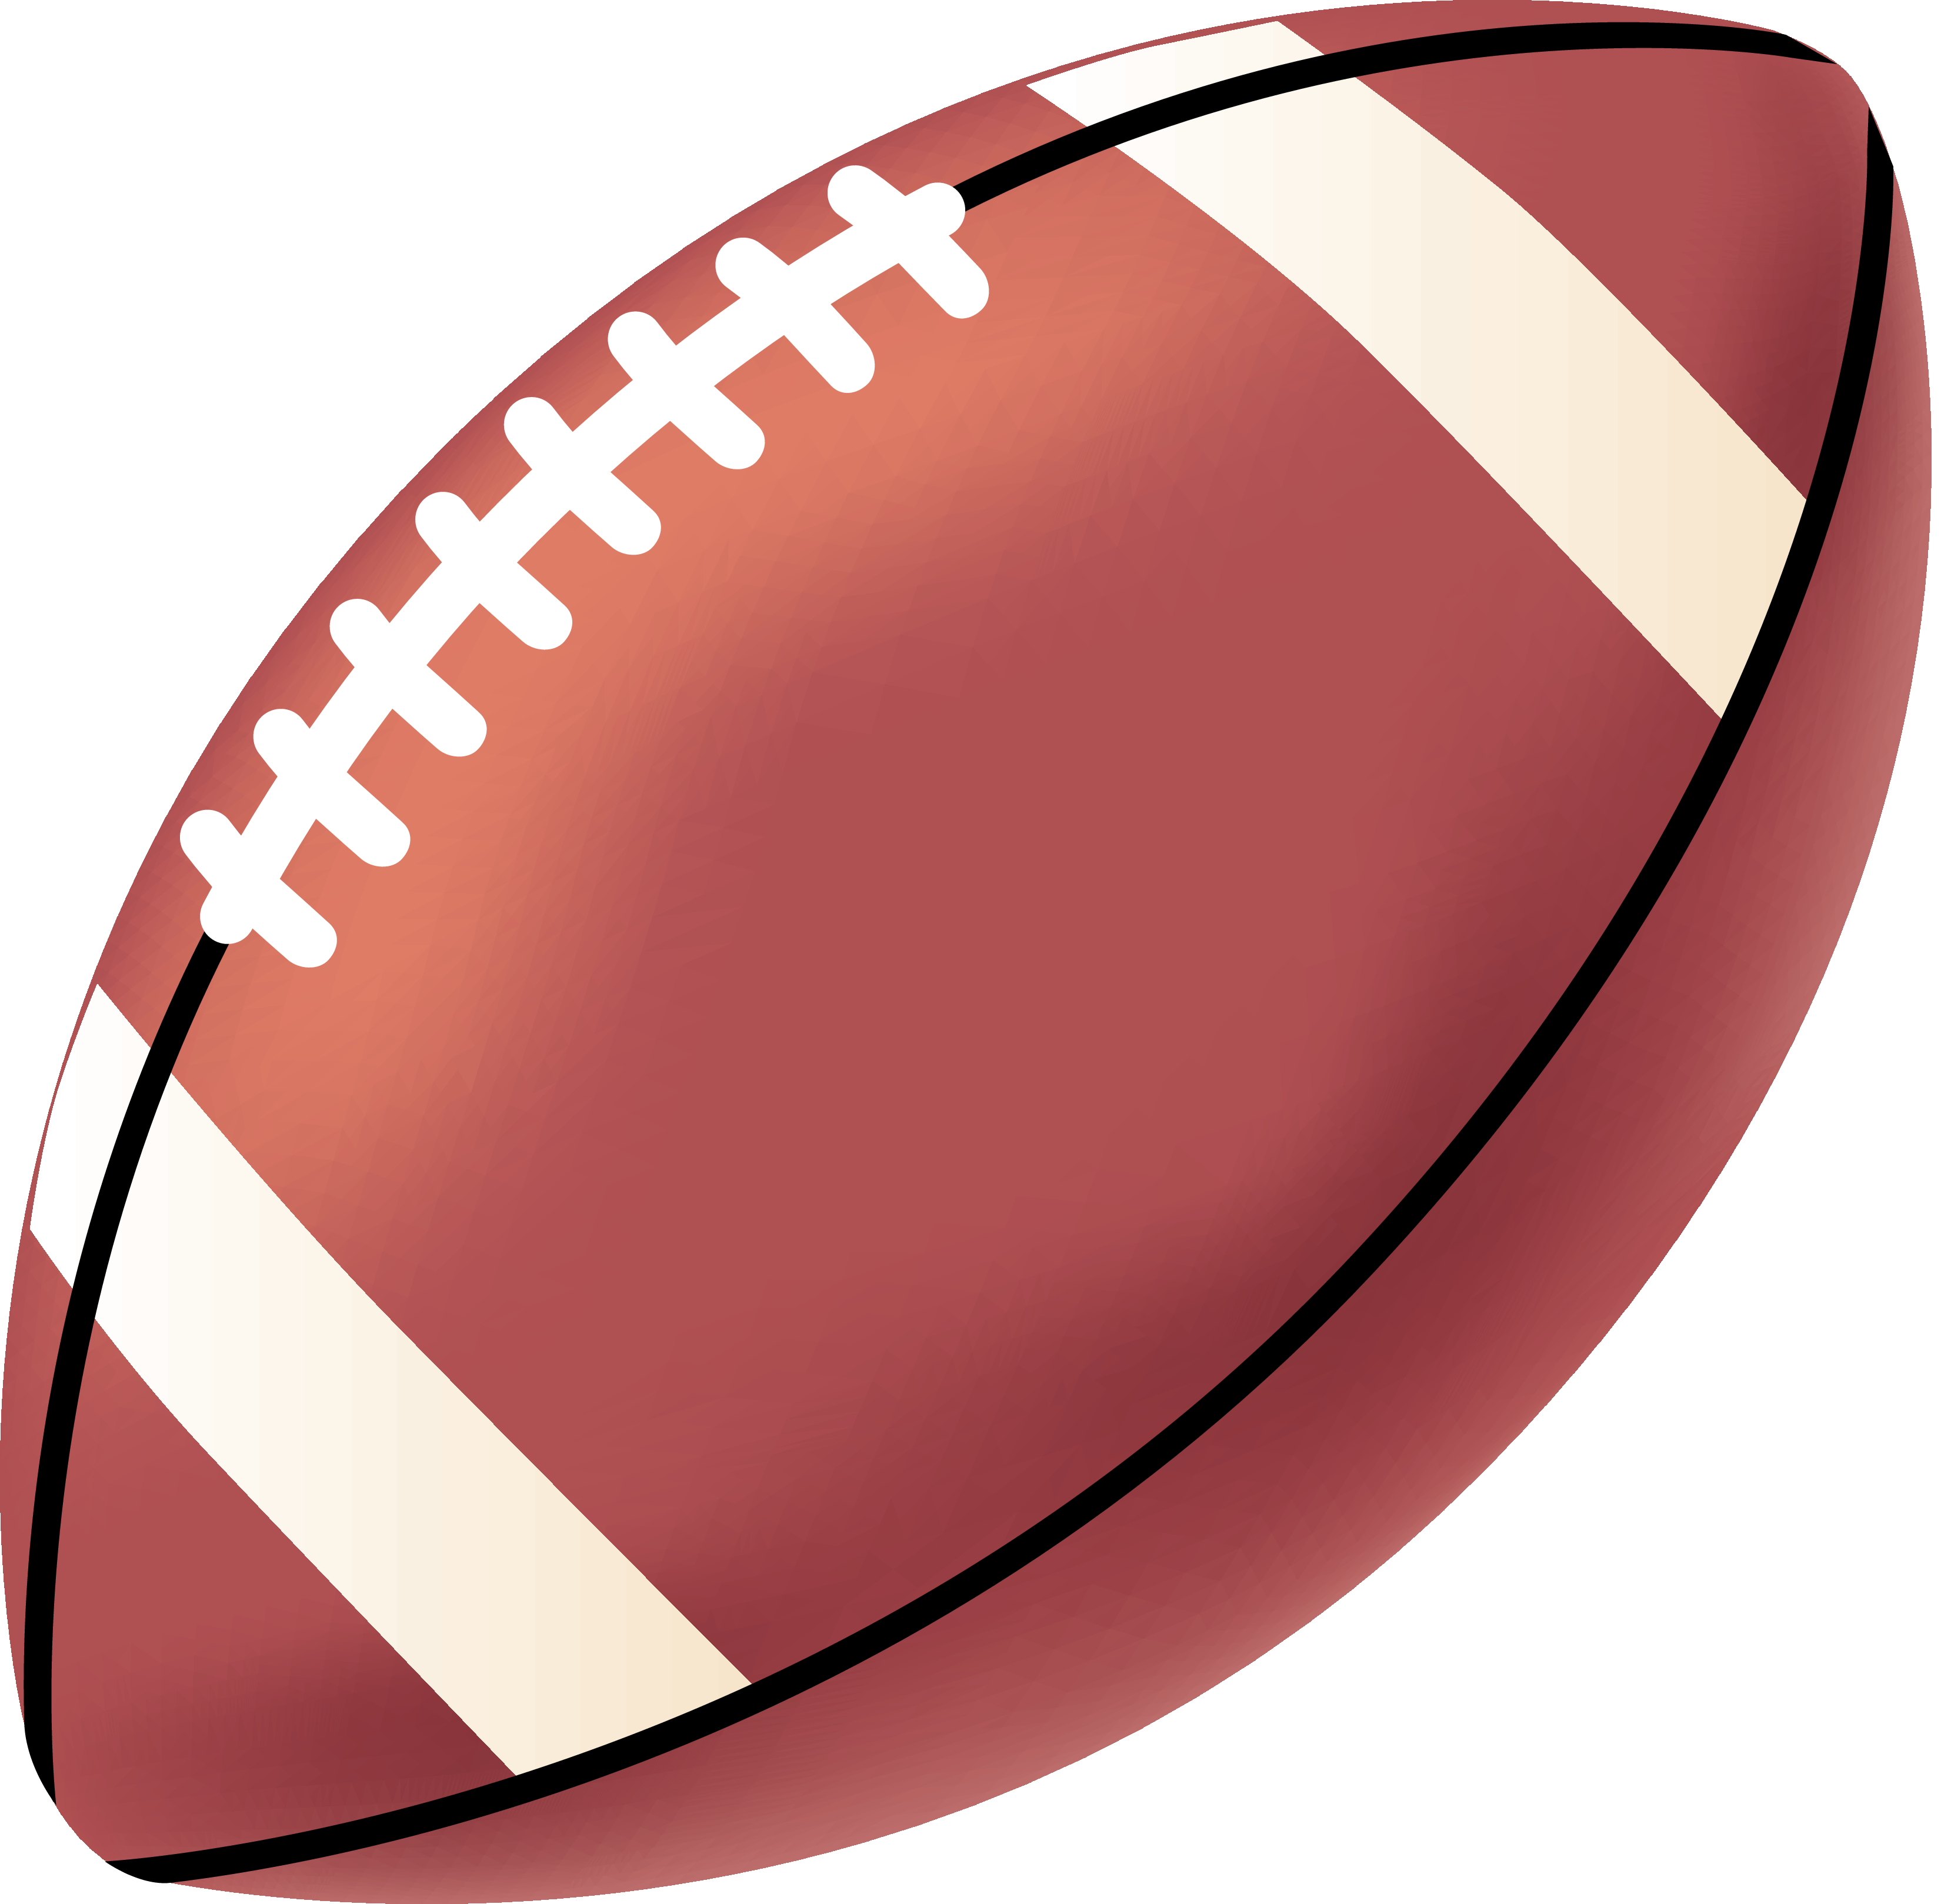 Free Printable Football Clipart at GetDrawings Free download